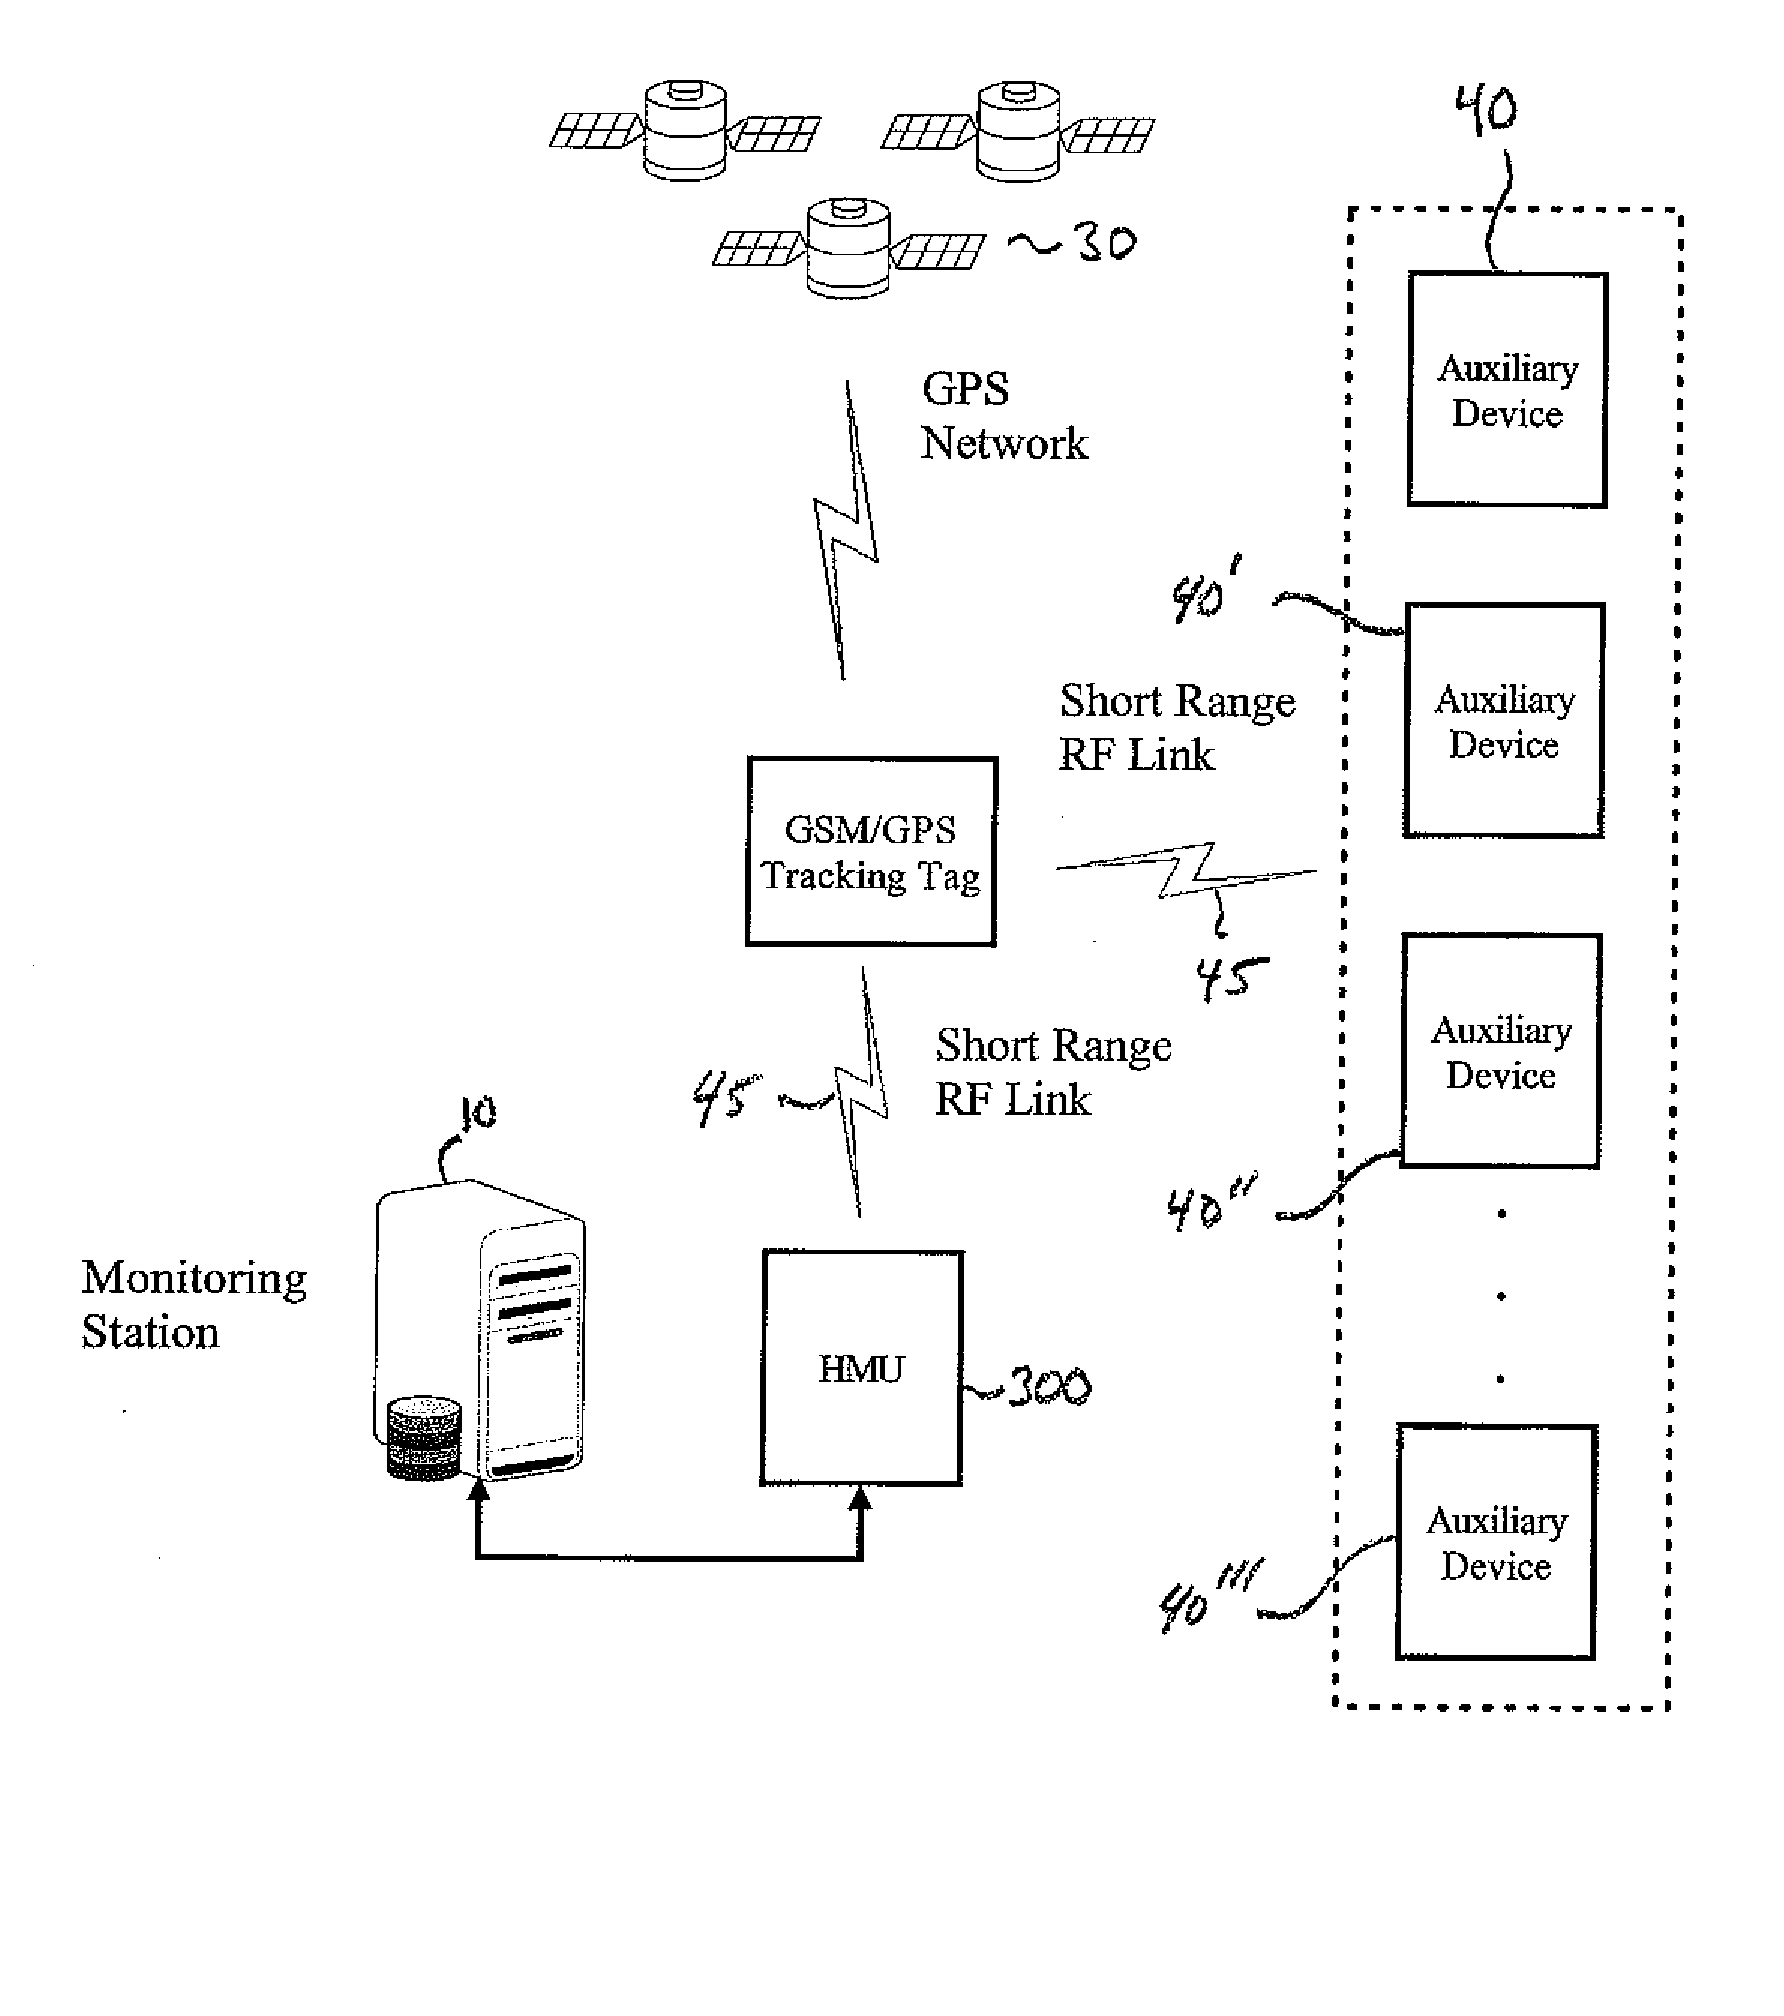 Active Wireless Tag And Auxiliary Device For Use With Monitoring Center For Tracking Individuals or Objects